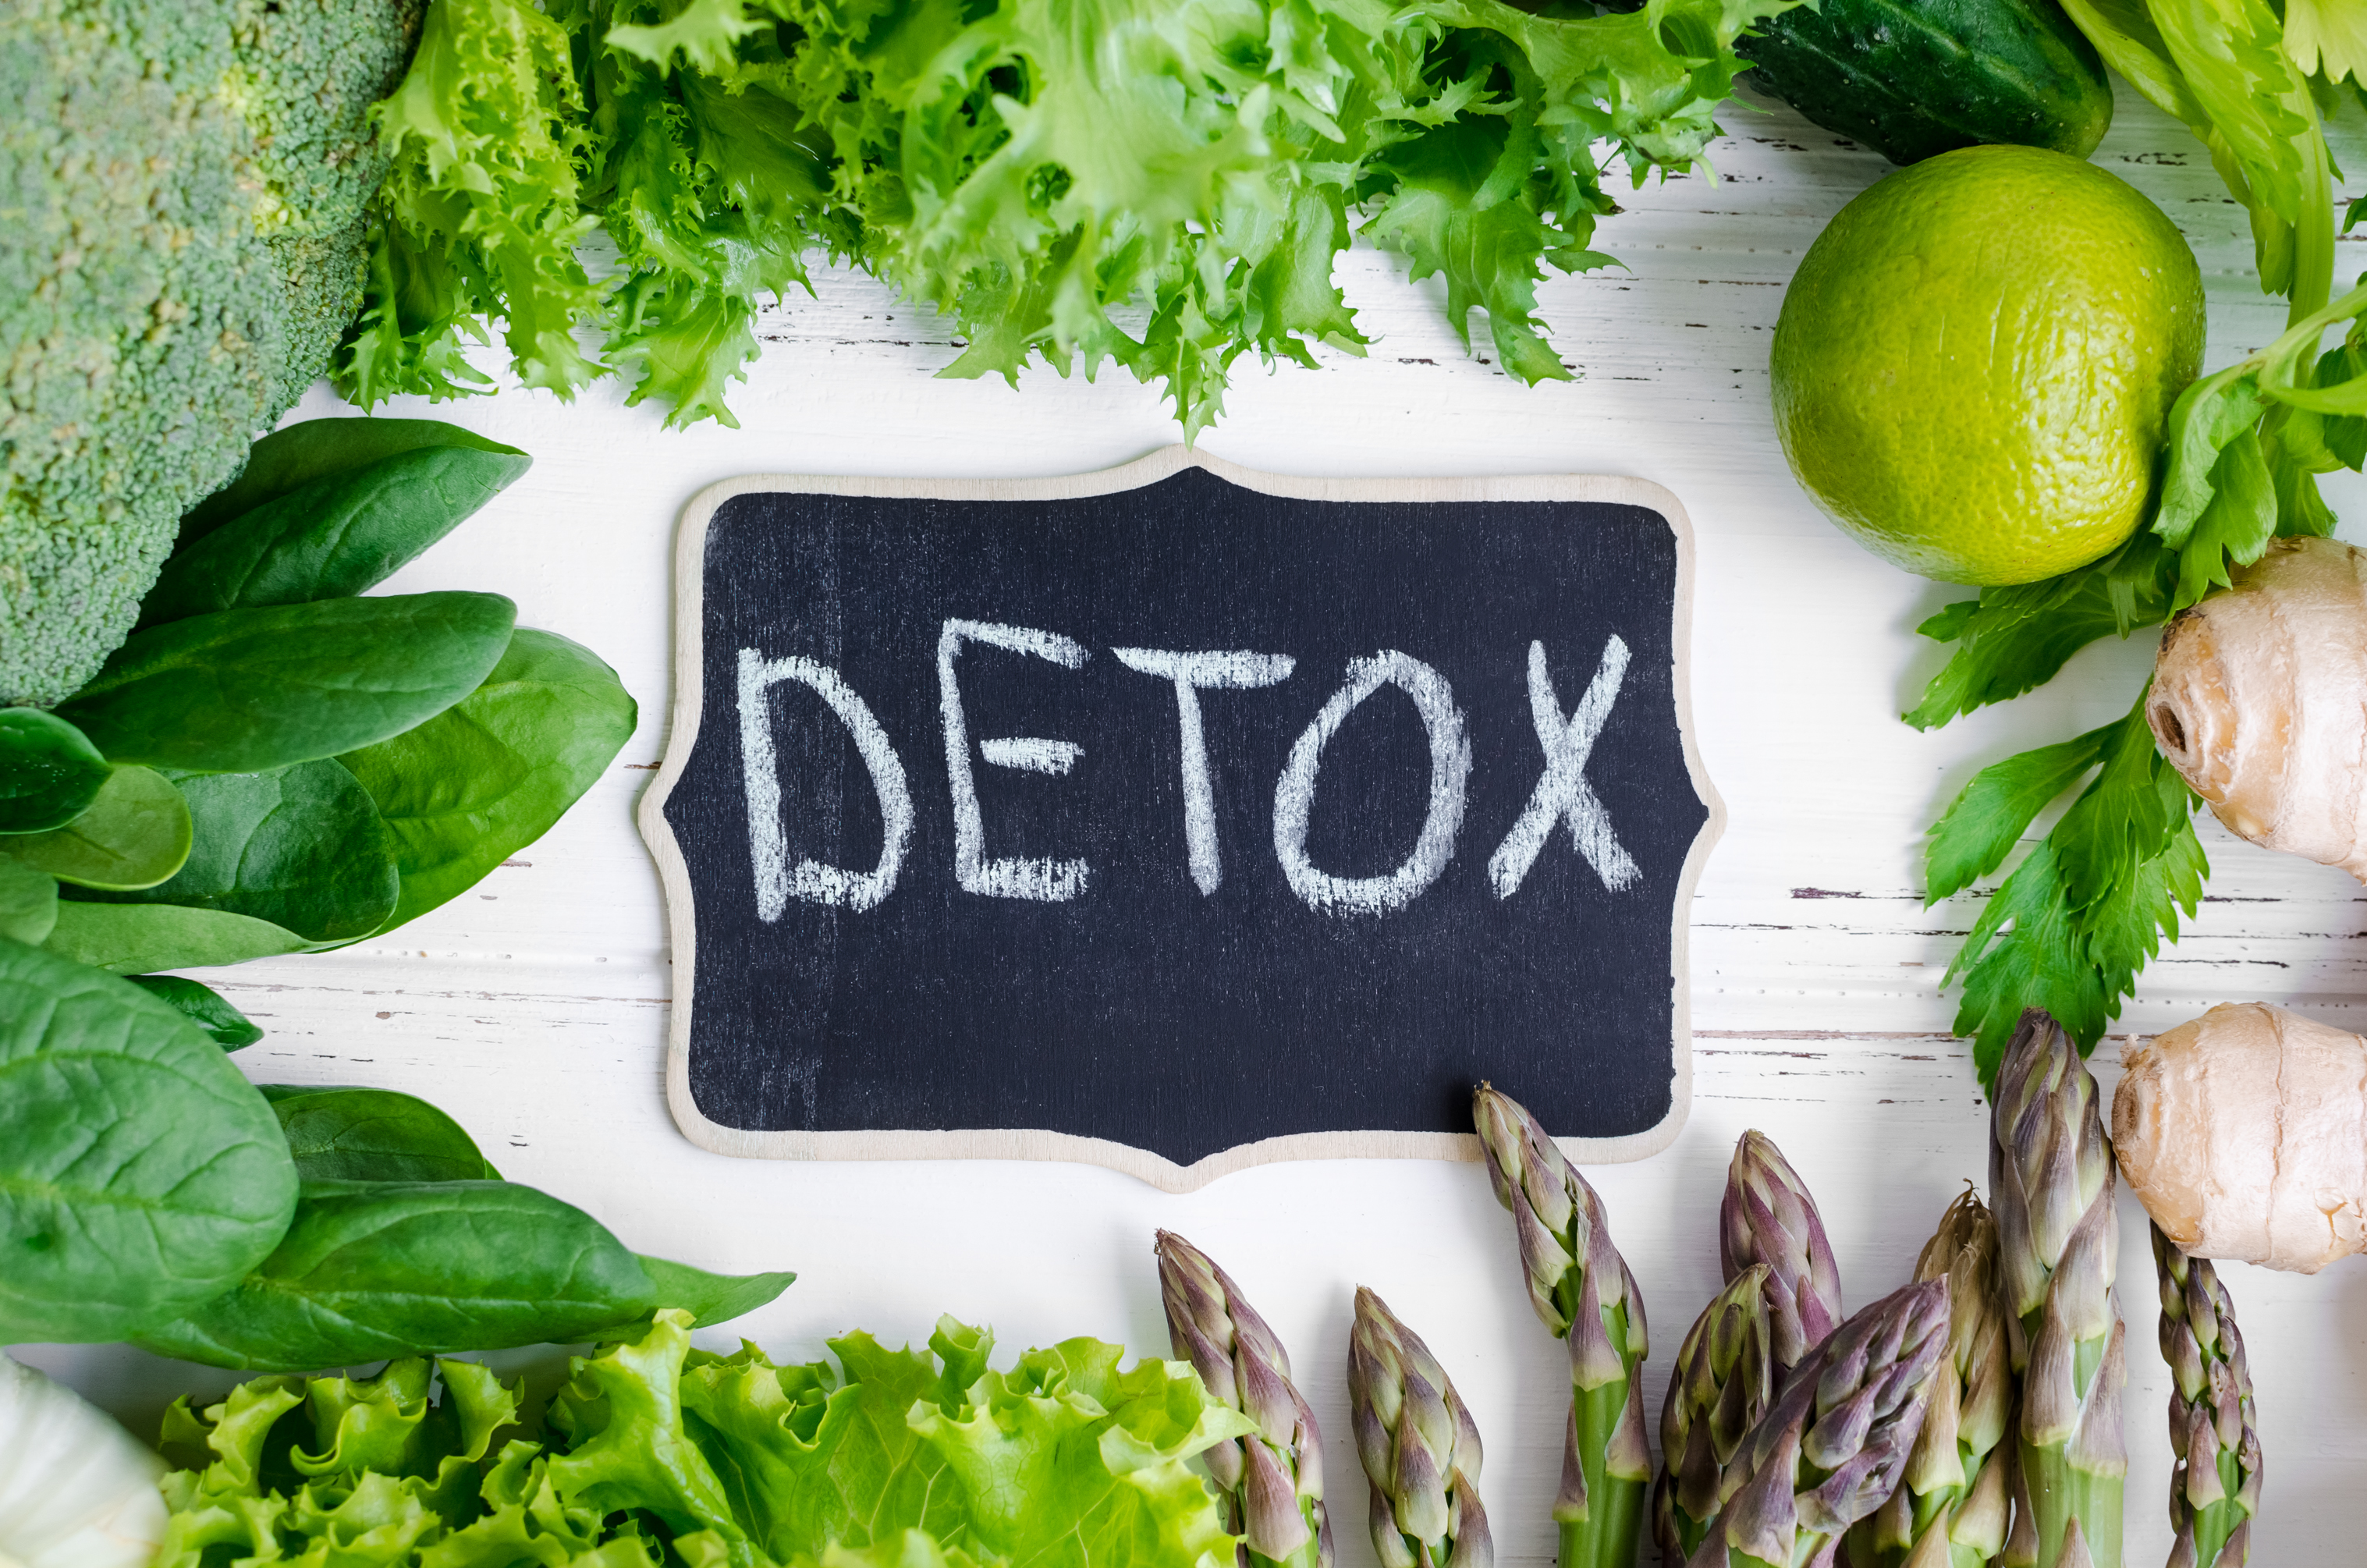 6 Signs You Need a Detox